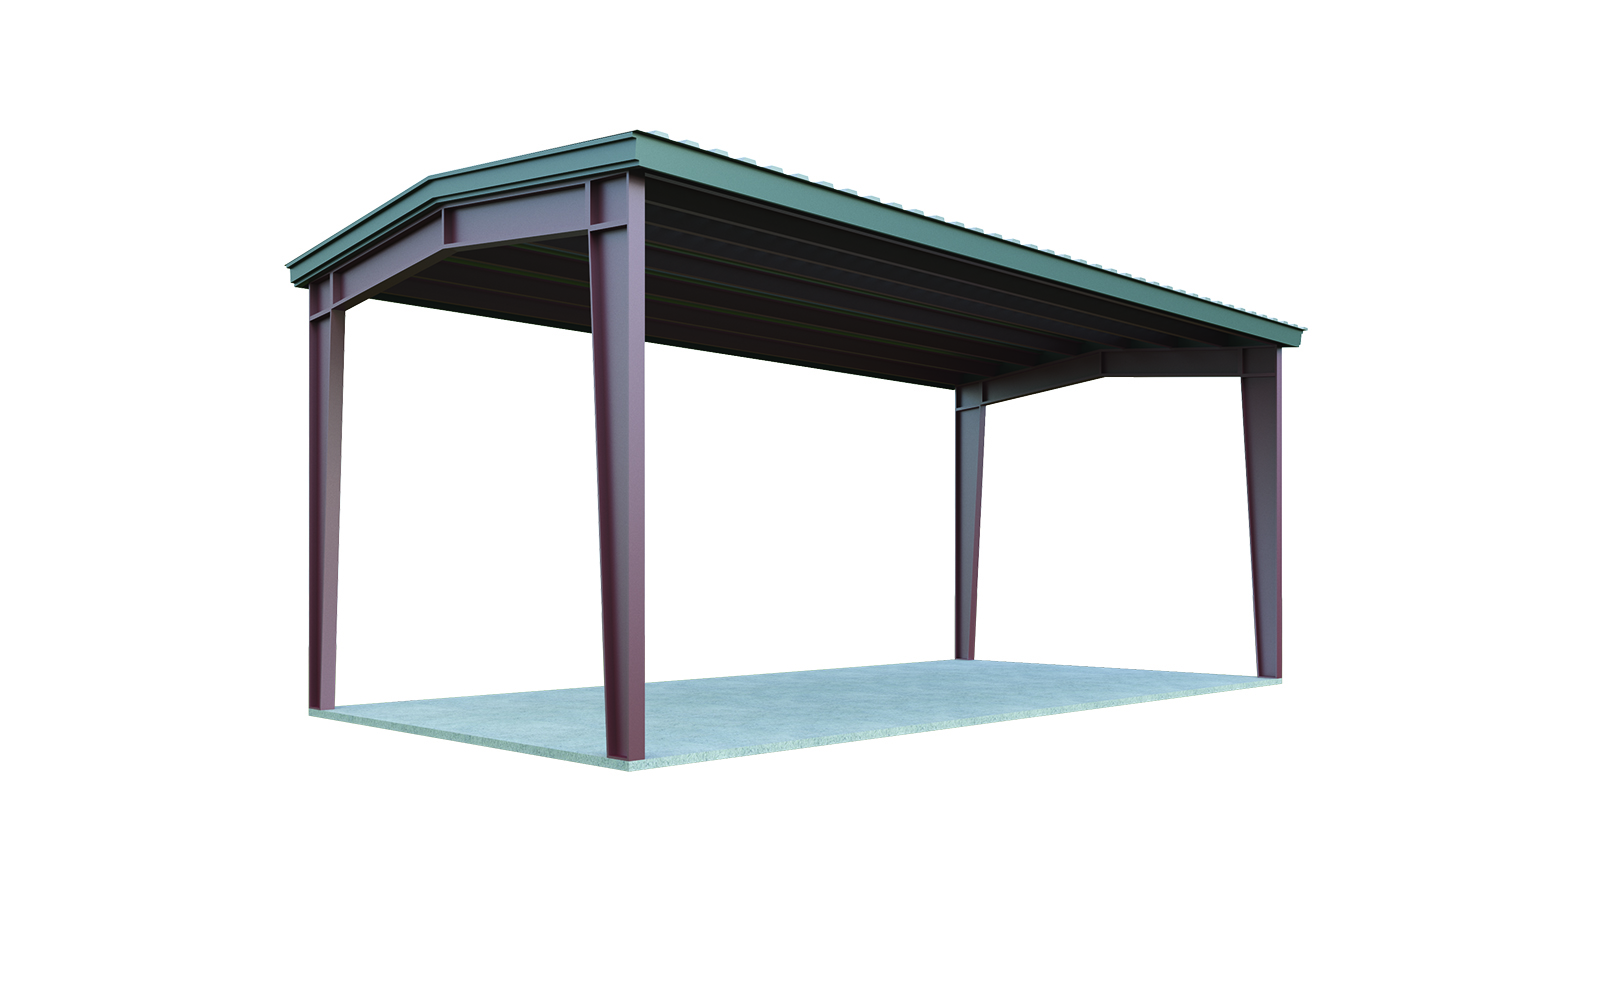  16x20 Carport  Package Quick Prices General Steel Shop